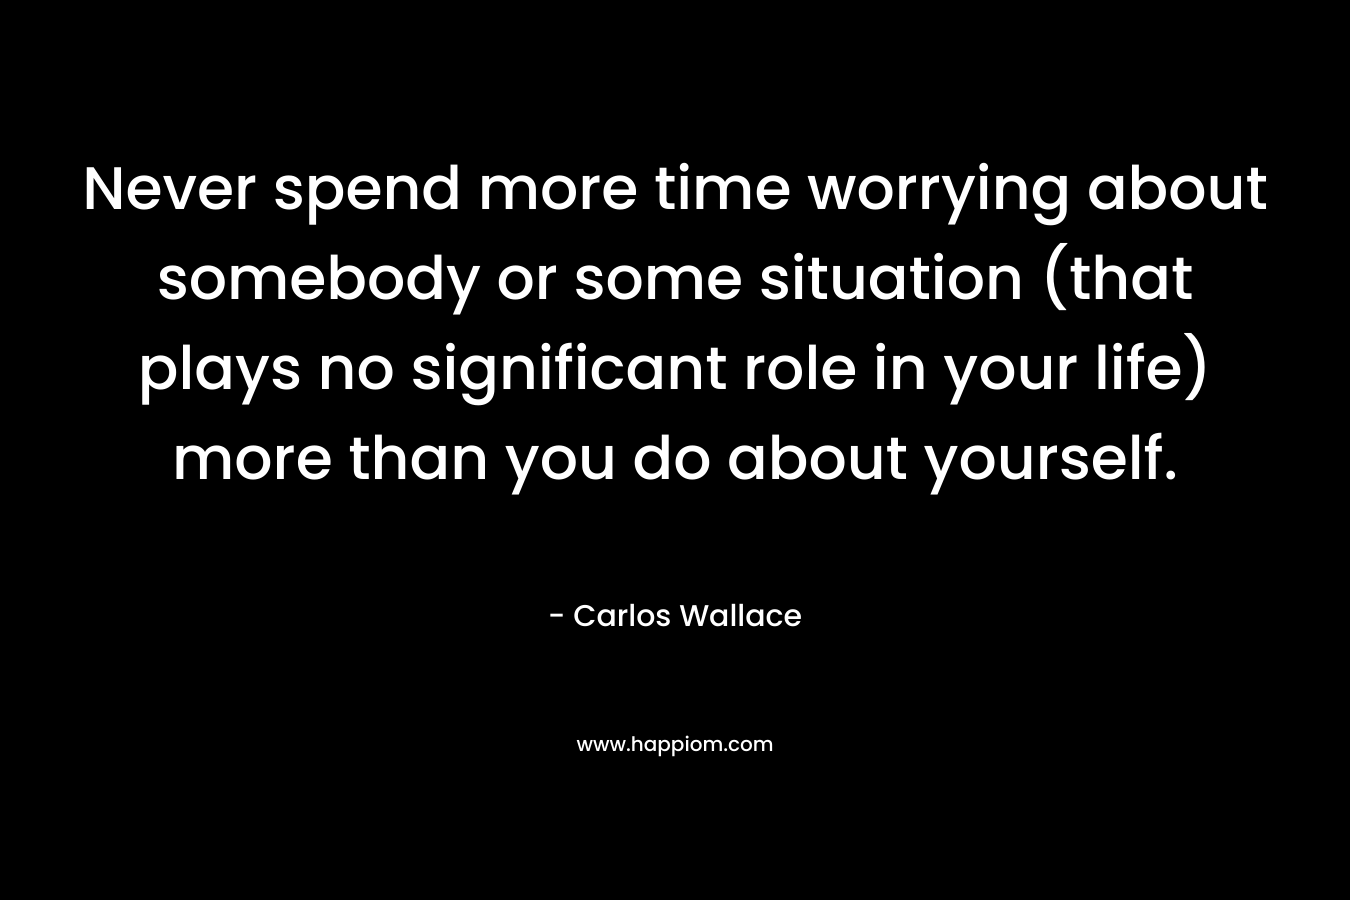 Never spend more time worrying about somebody or some situation (that plays no significant role in your life) more than you do about yourself.